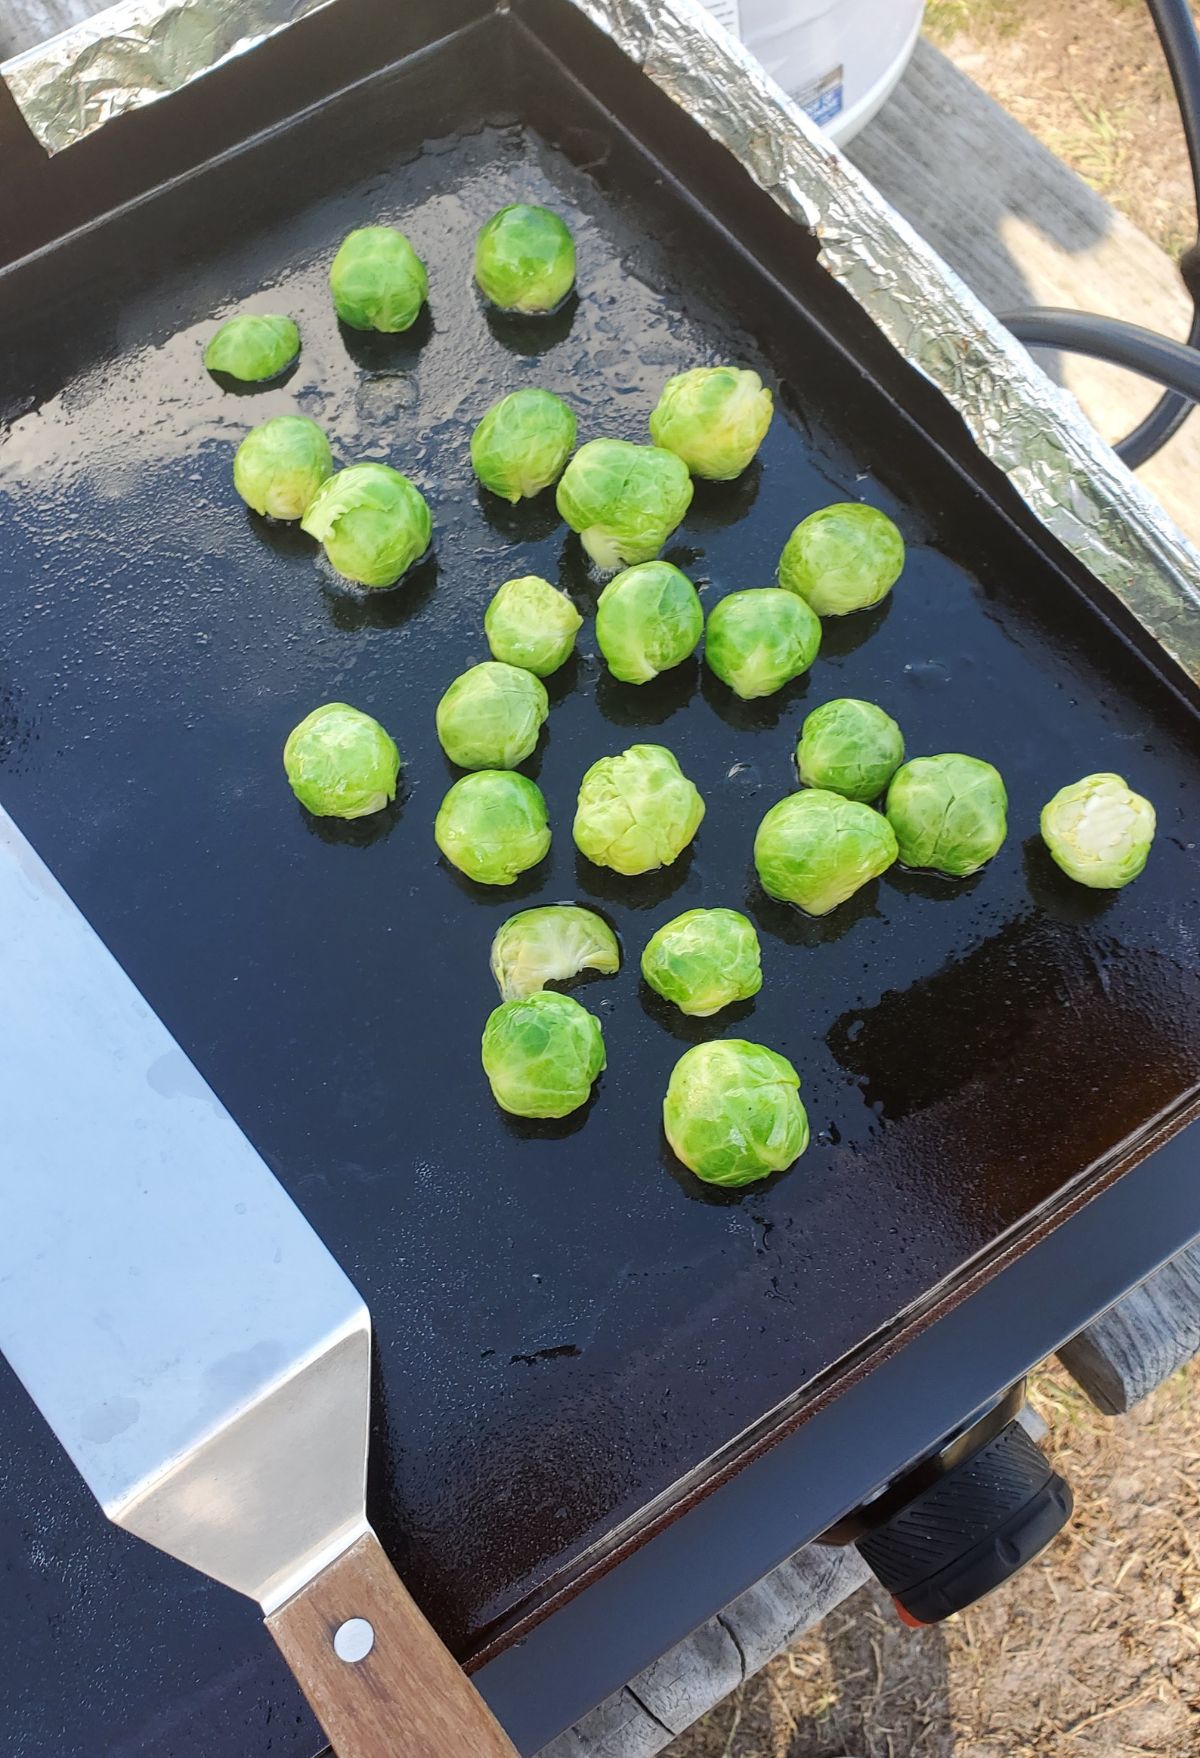 Brussel sprouts on a grill with a knife.